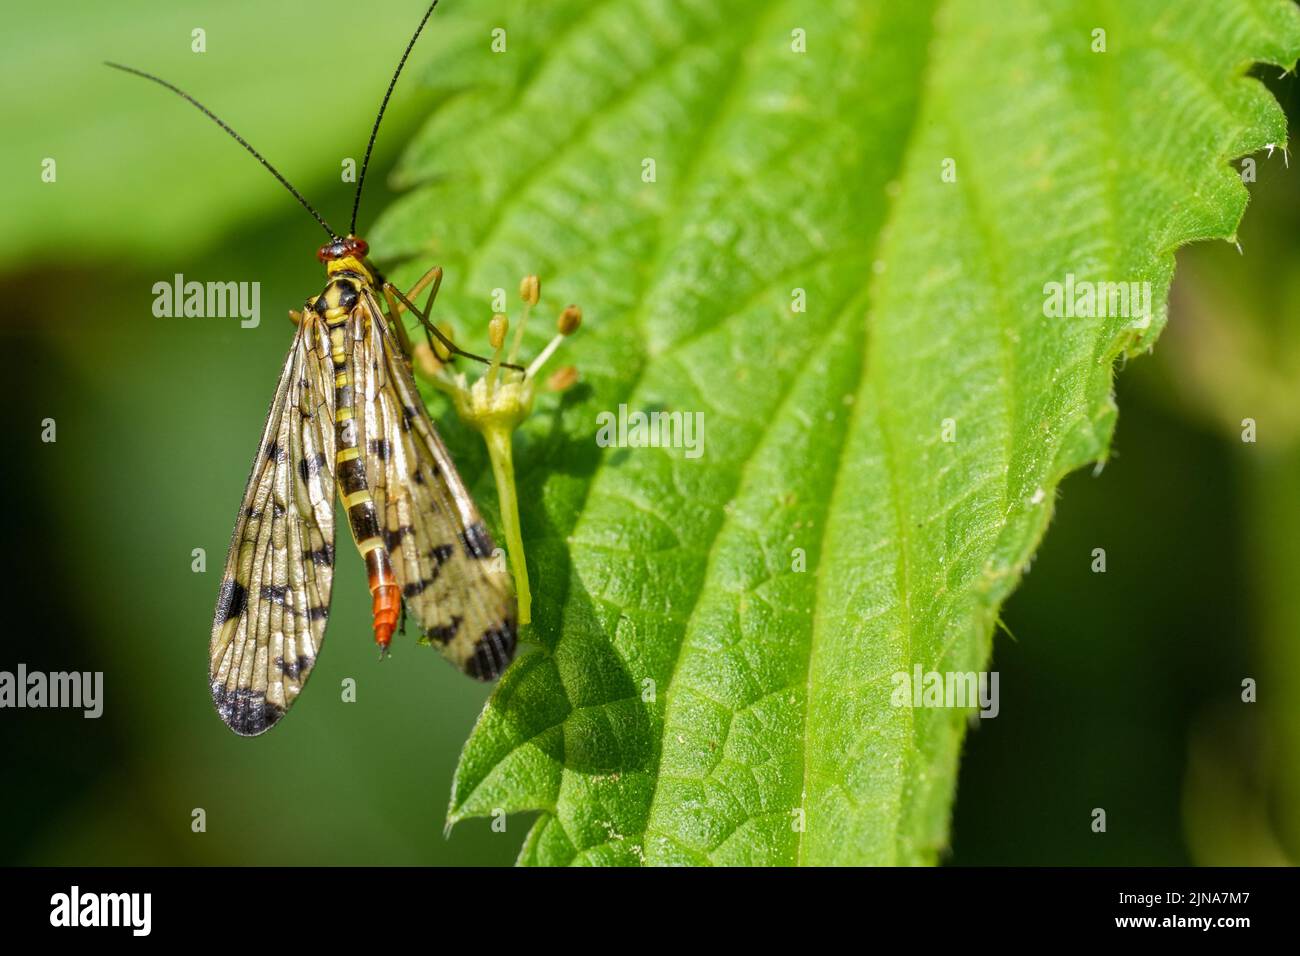 A closeup shot of a common scorpionfly perched on a green leaf on a sunny day Stock Photo